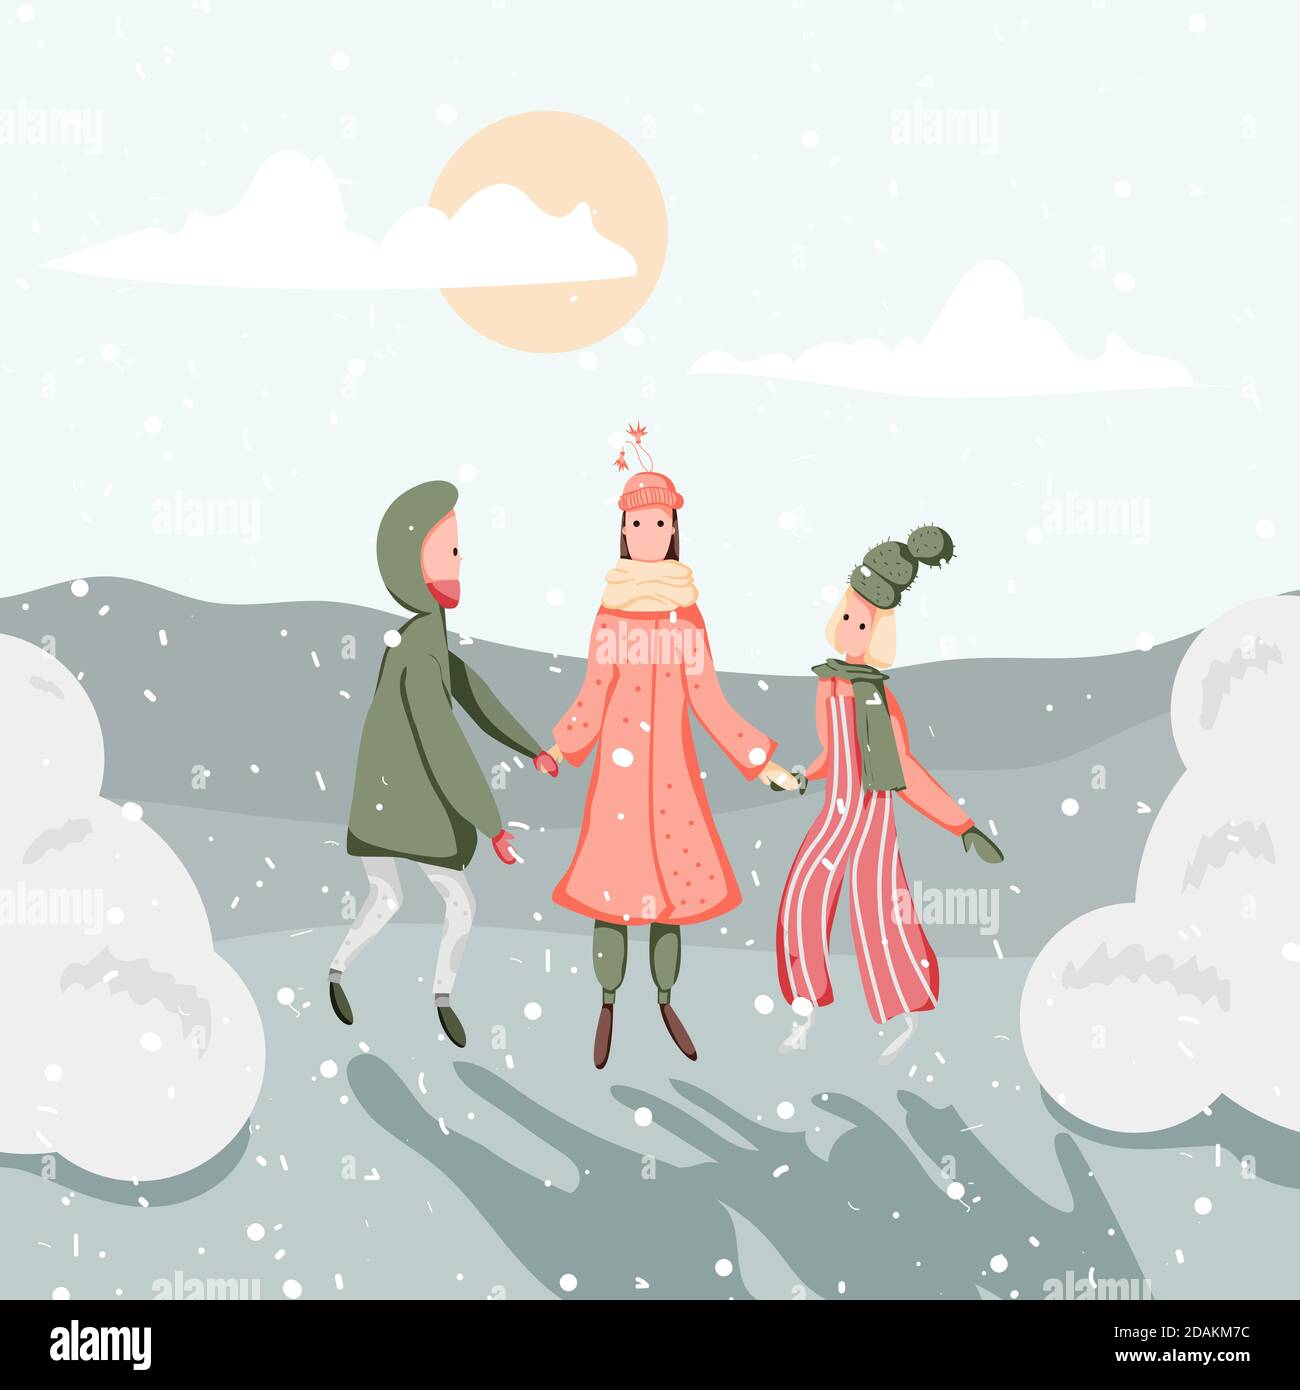 Girls are jumping in a round dance and enjoying snowy winter.  Stock Vector